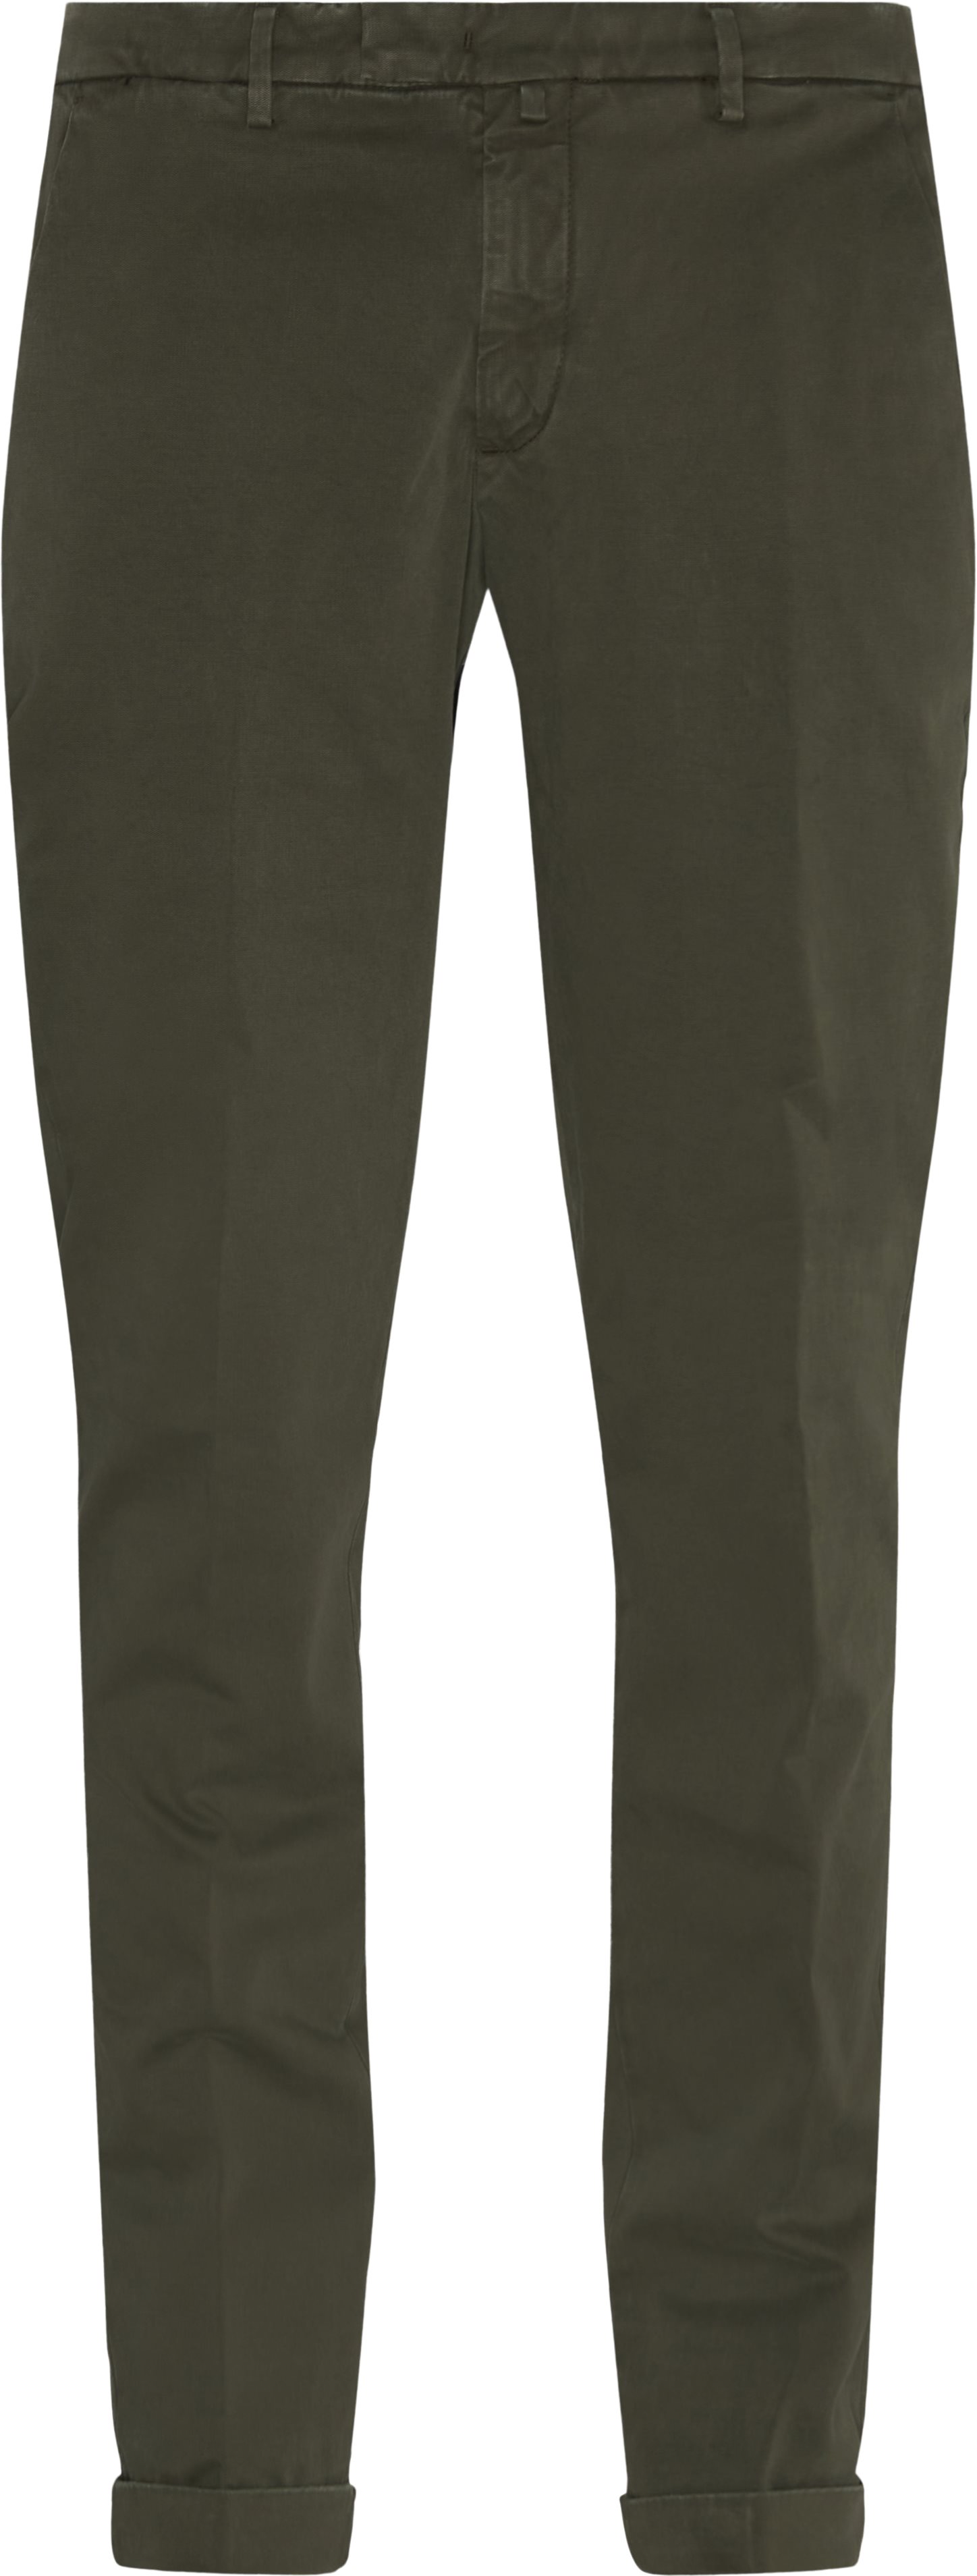 Chinos - Trousers - Regular fit - Army